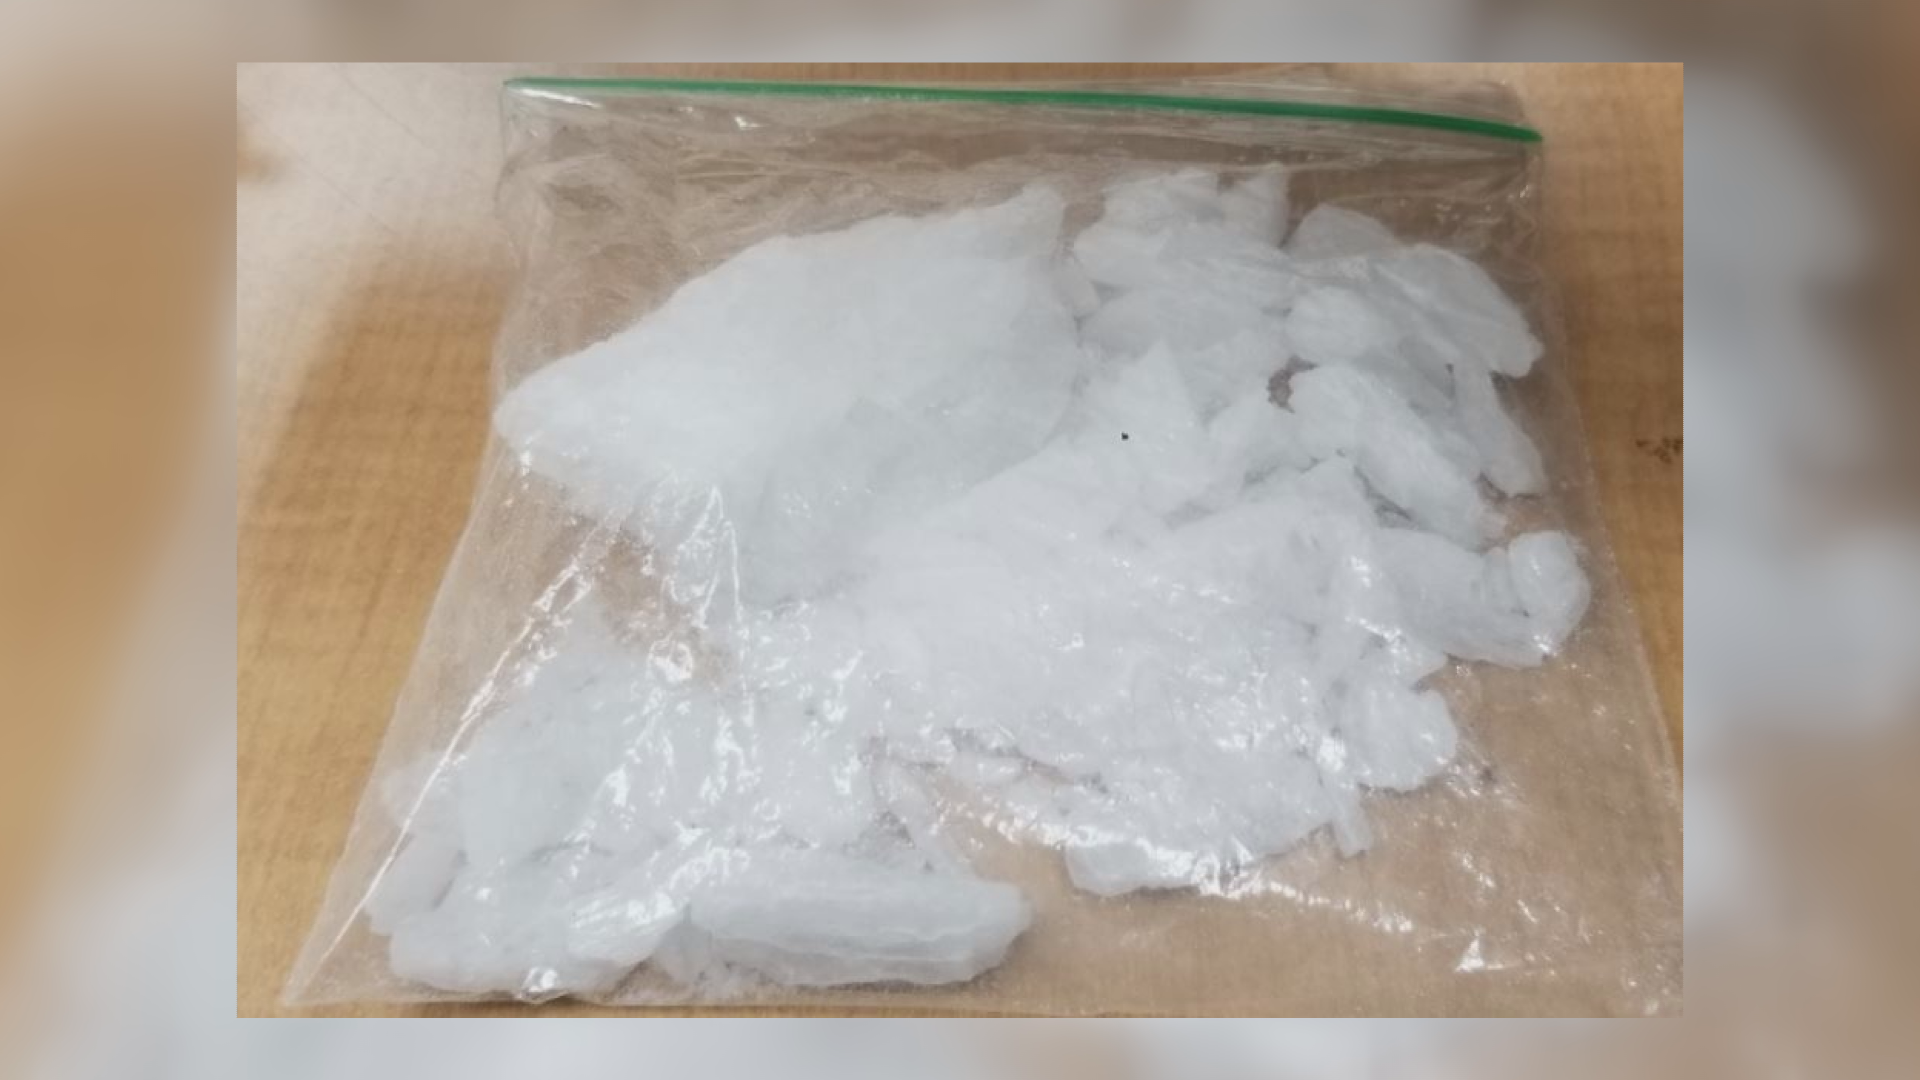 Centerville Police say they pulled over an unlicensed driver Thursday and ended up finding a large amount of methamphetamine in his car.